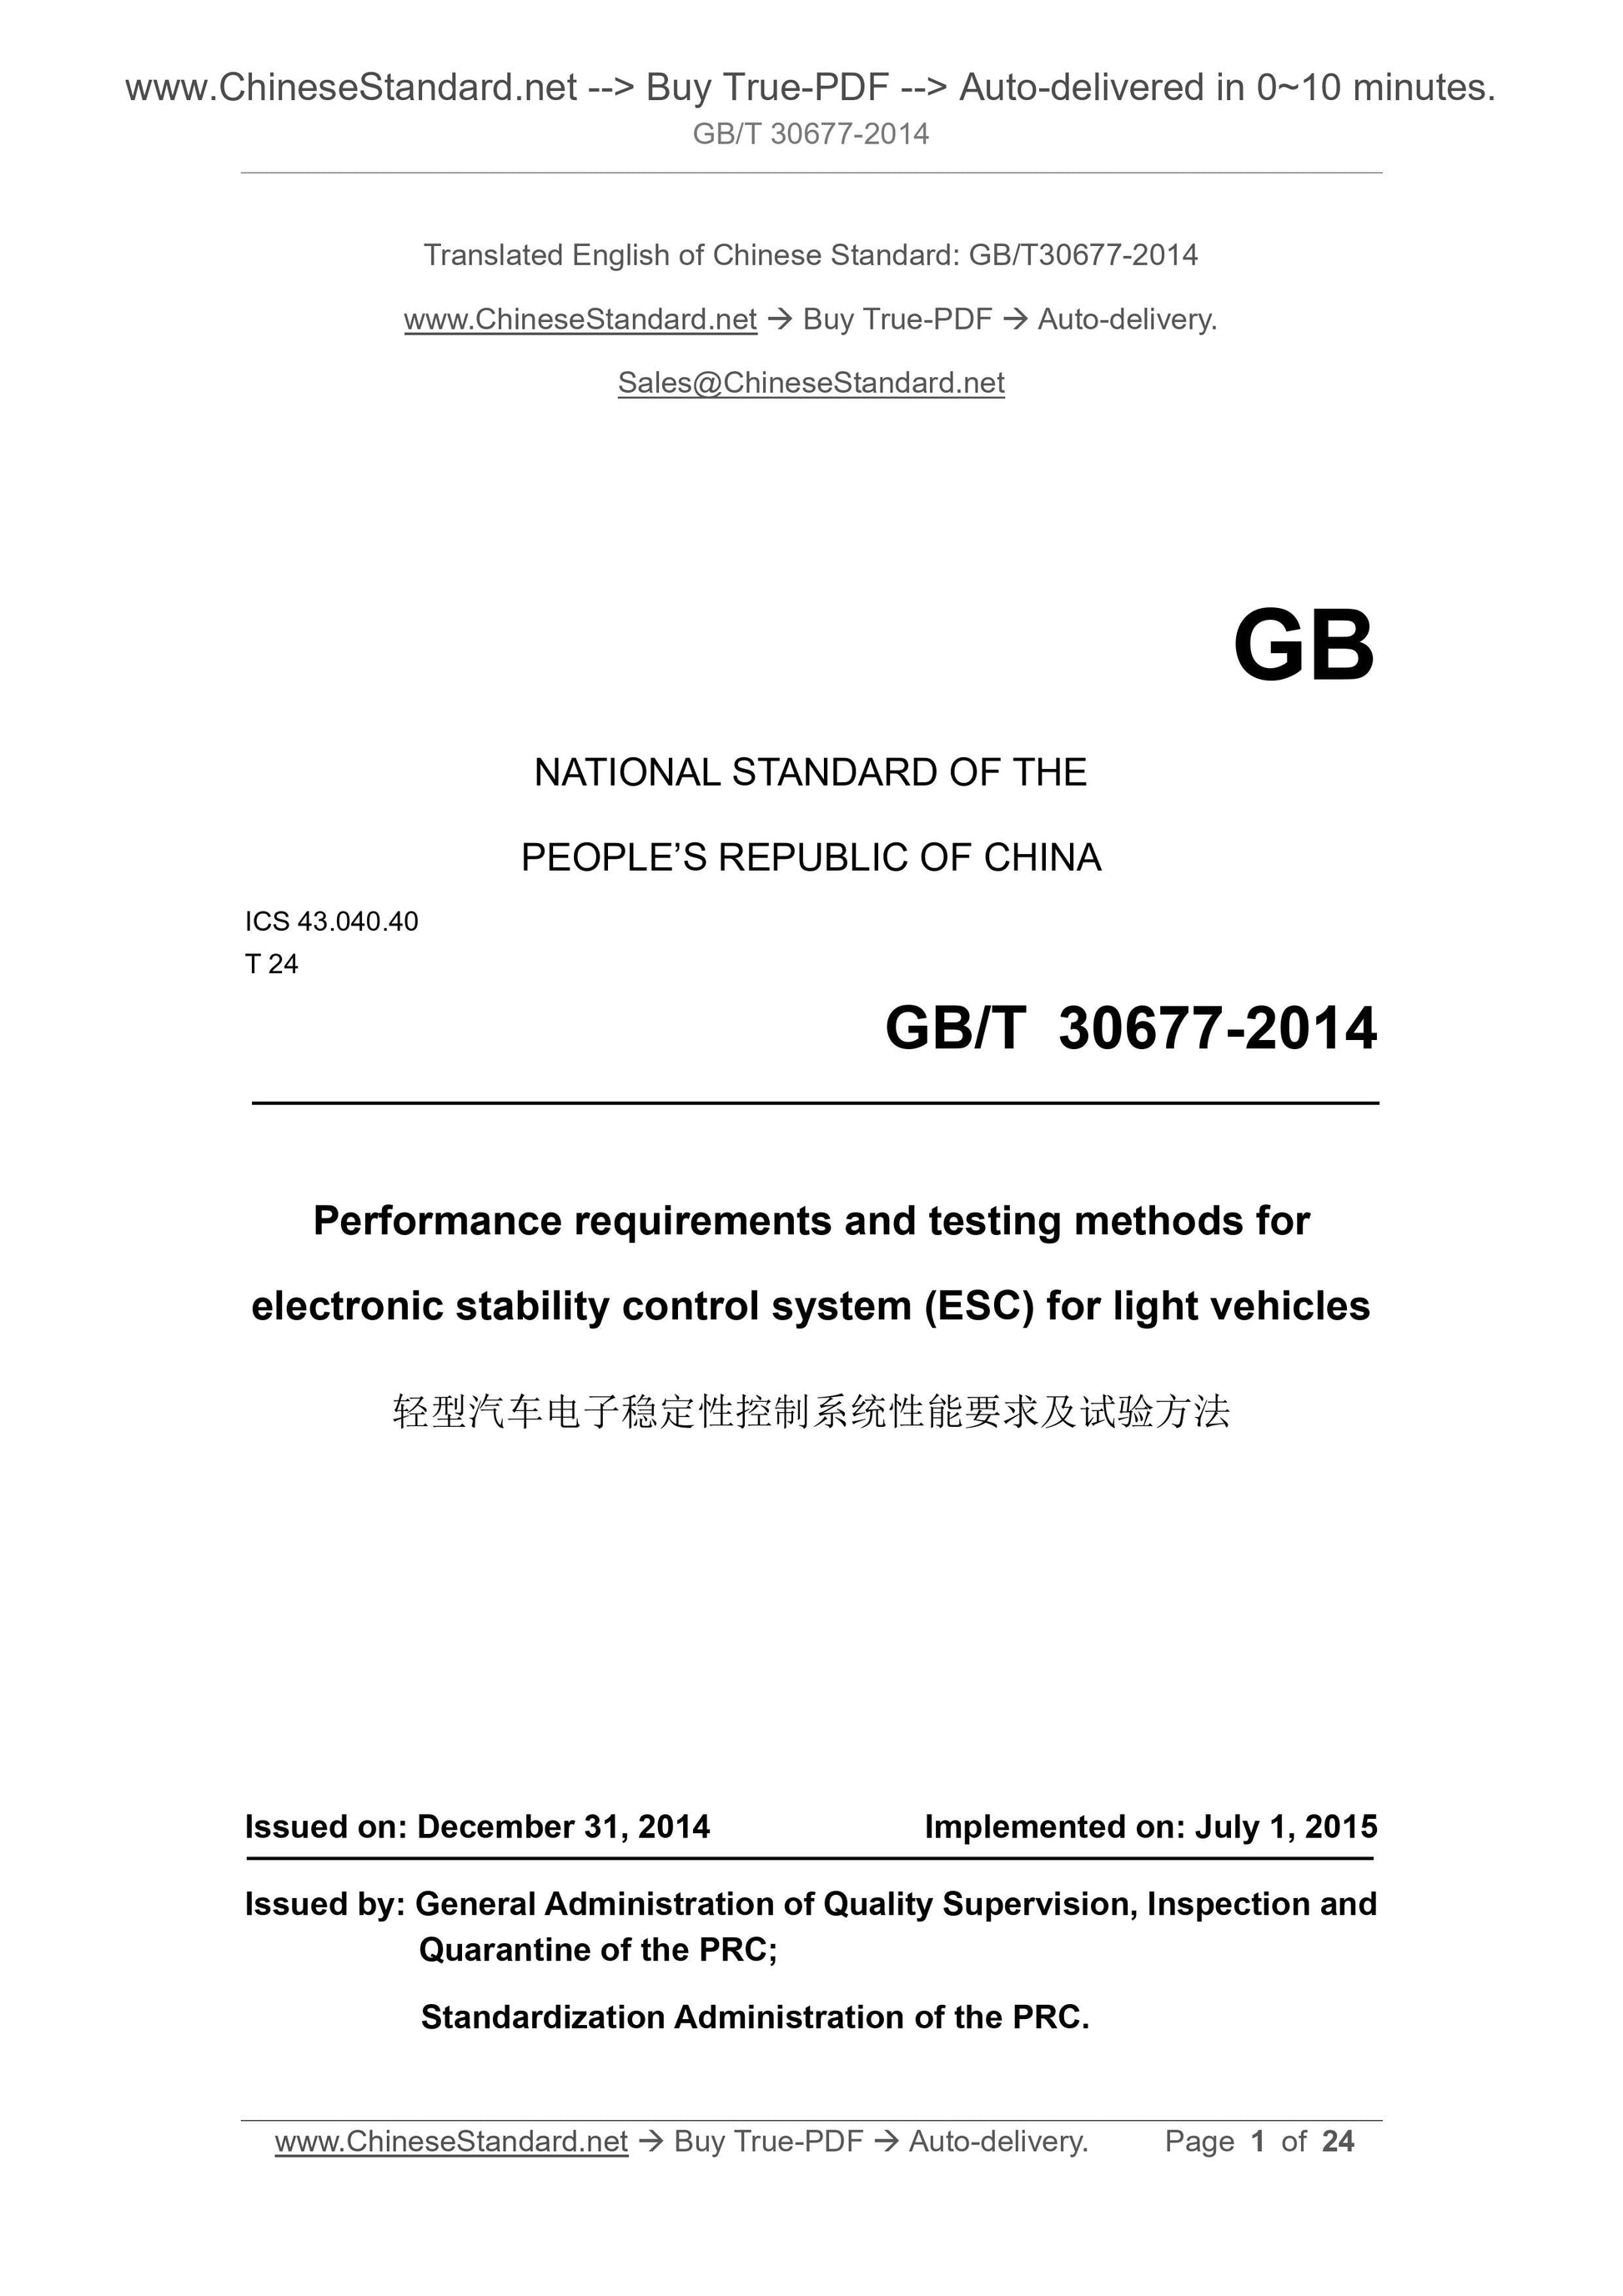 GB/T 30677-2014 Page 1